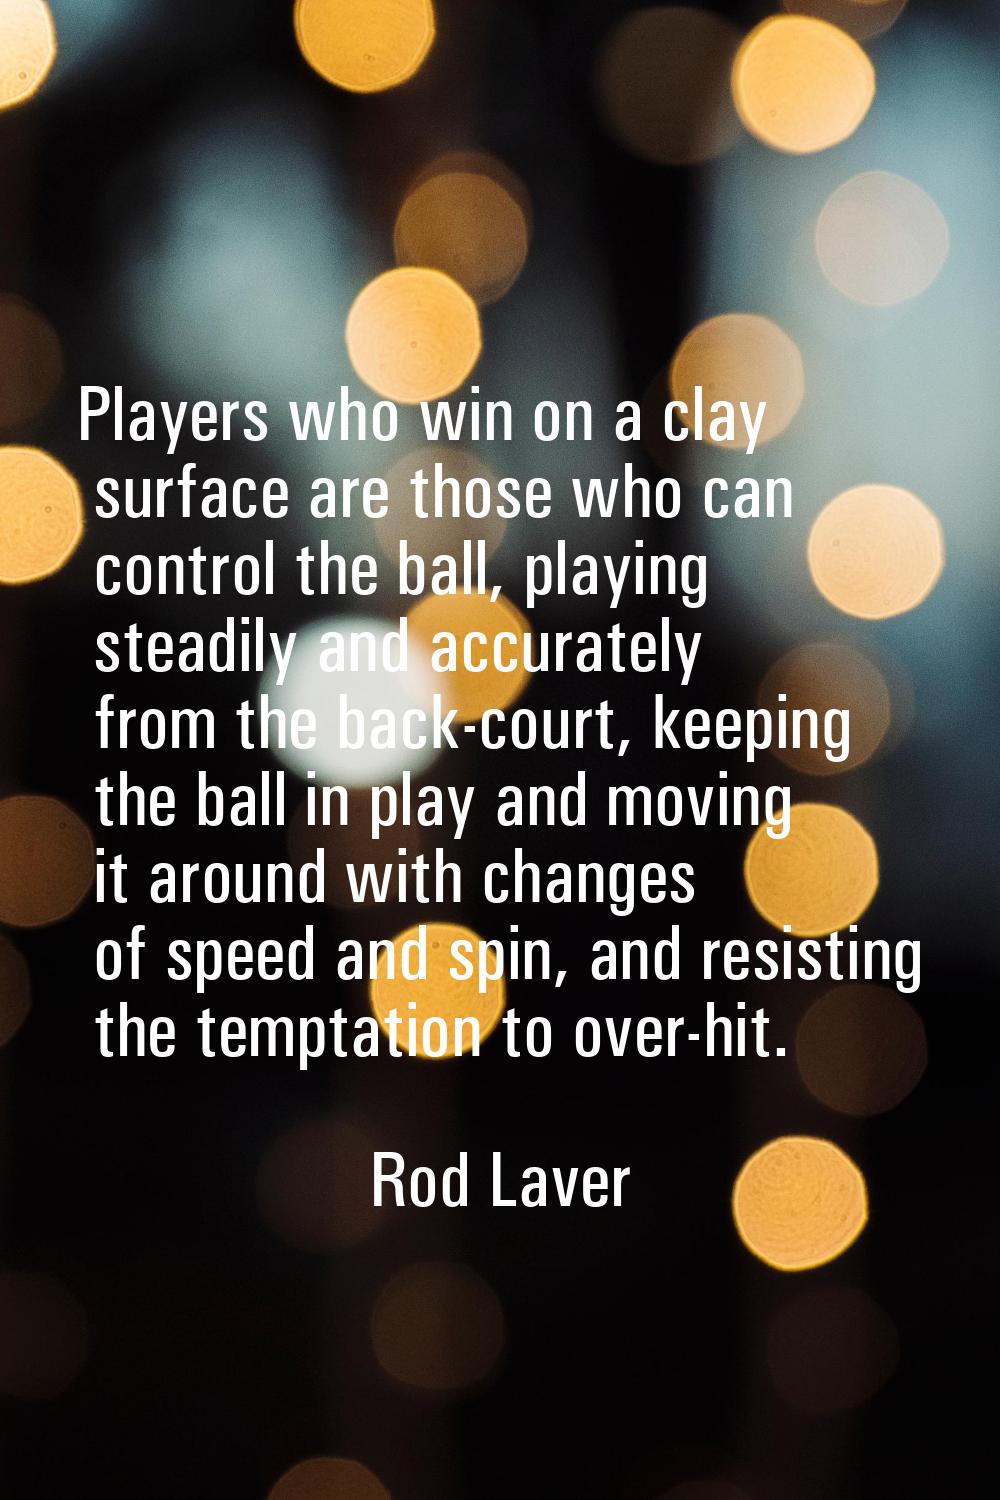 Players who win on a clay surface are those who can control the ball, playing steadily and accurate